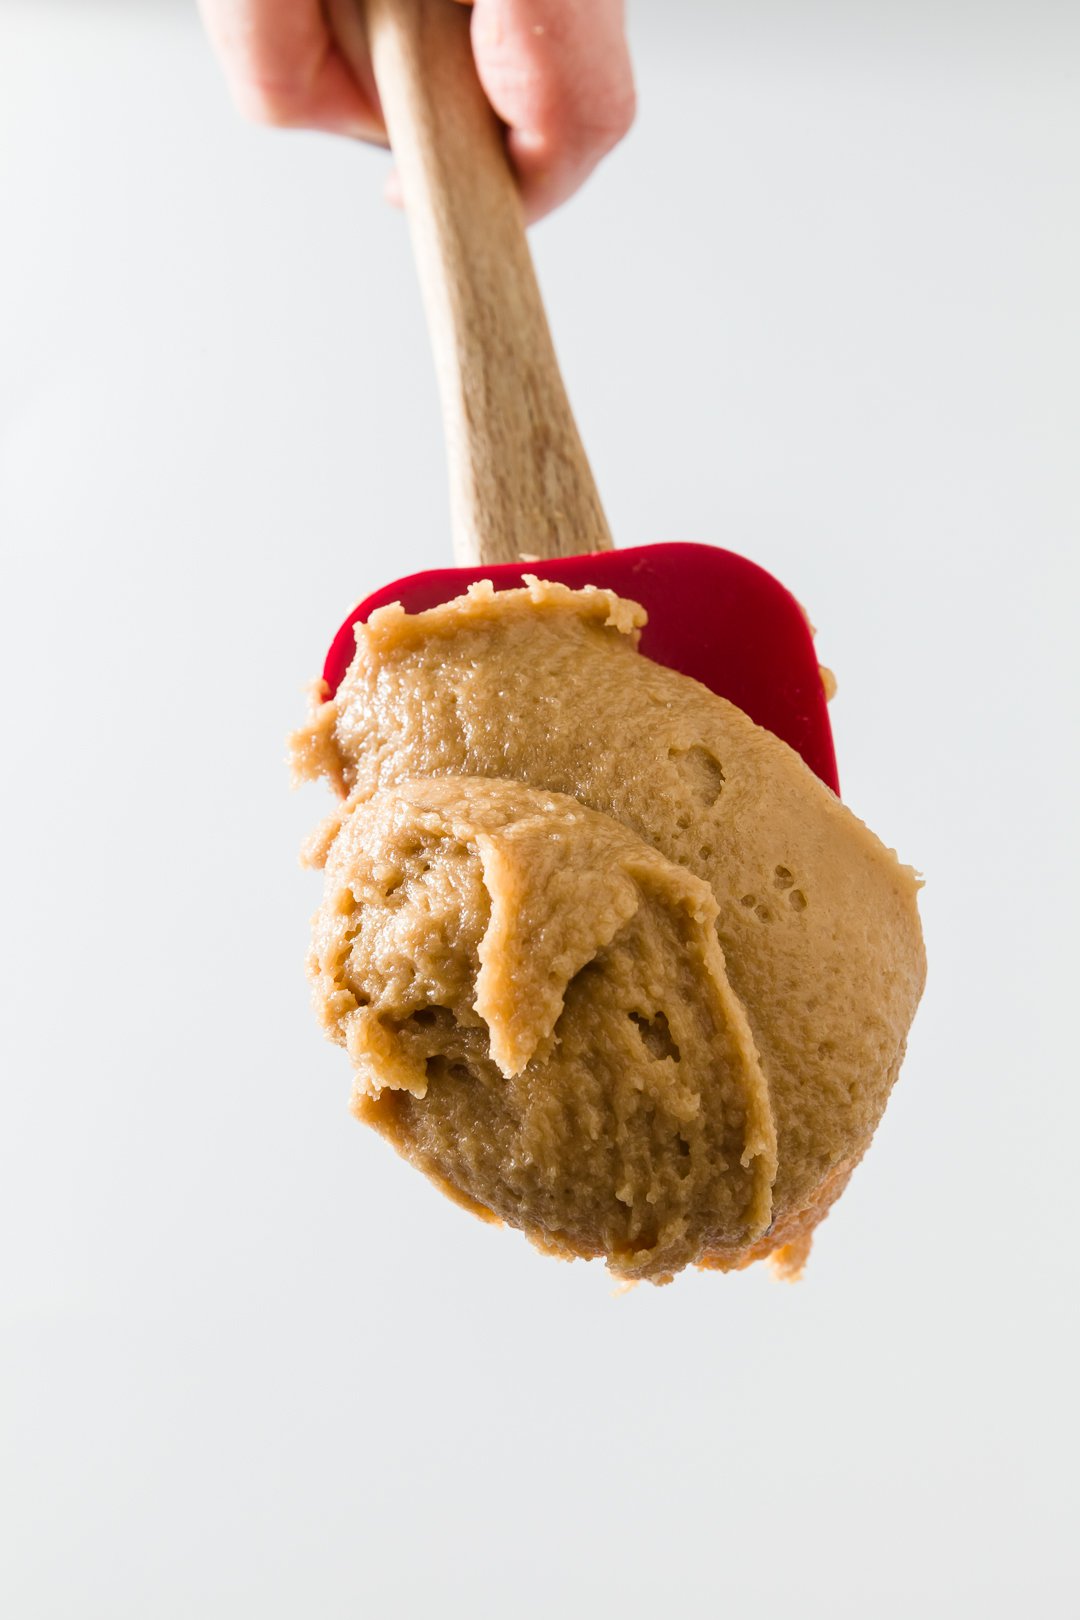 Cookie dough frosting on a red spatula